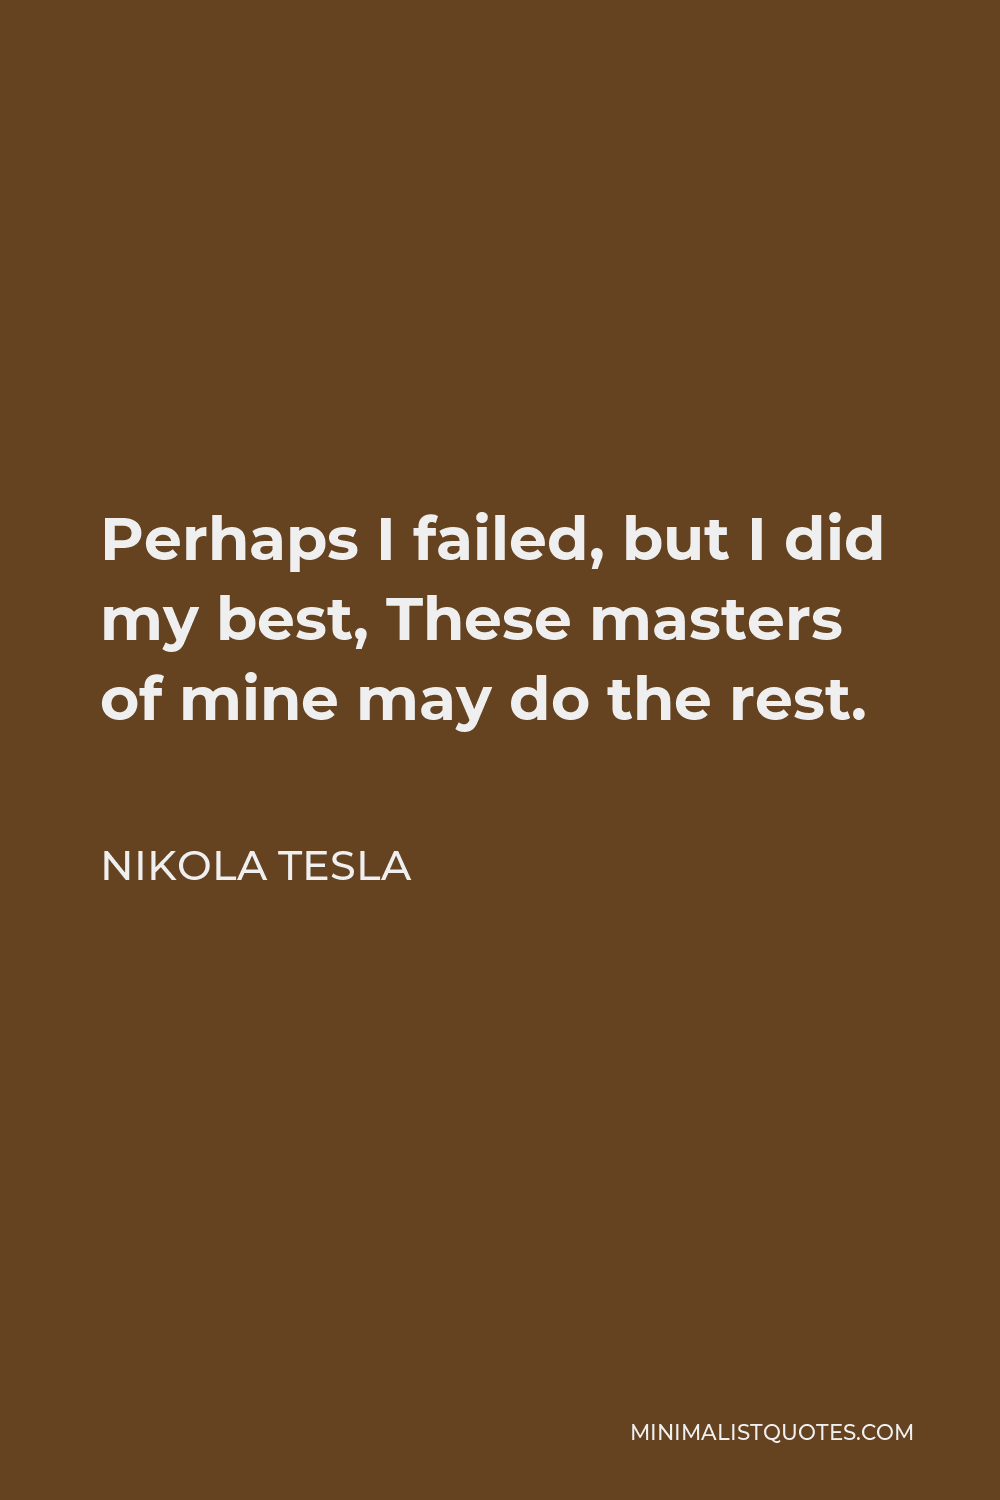 Nikola Tesla Quote - Perhaps I failed, but I did my best, These masters of mine may do the rest.